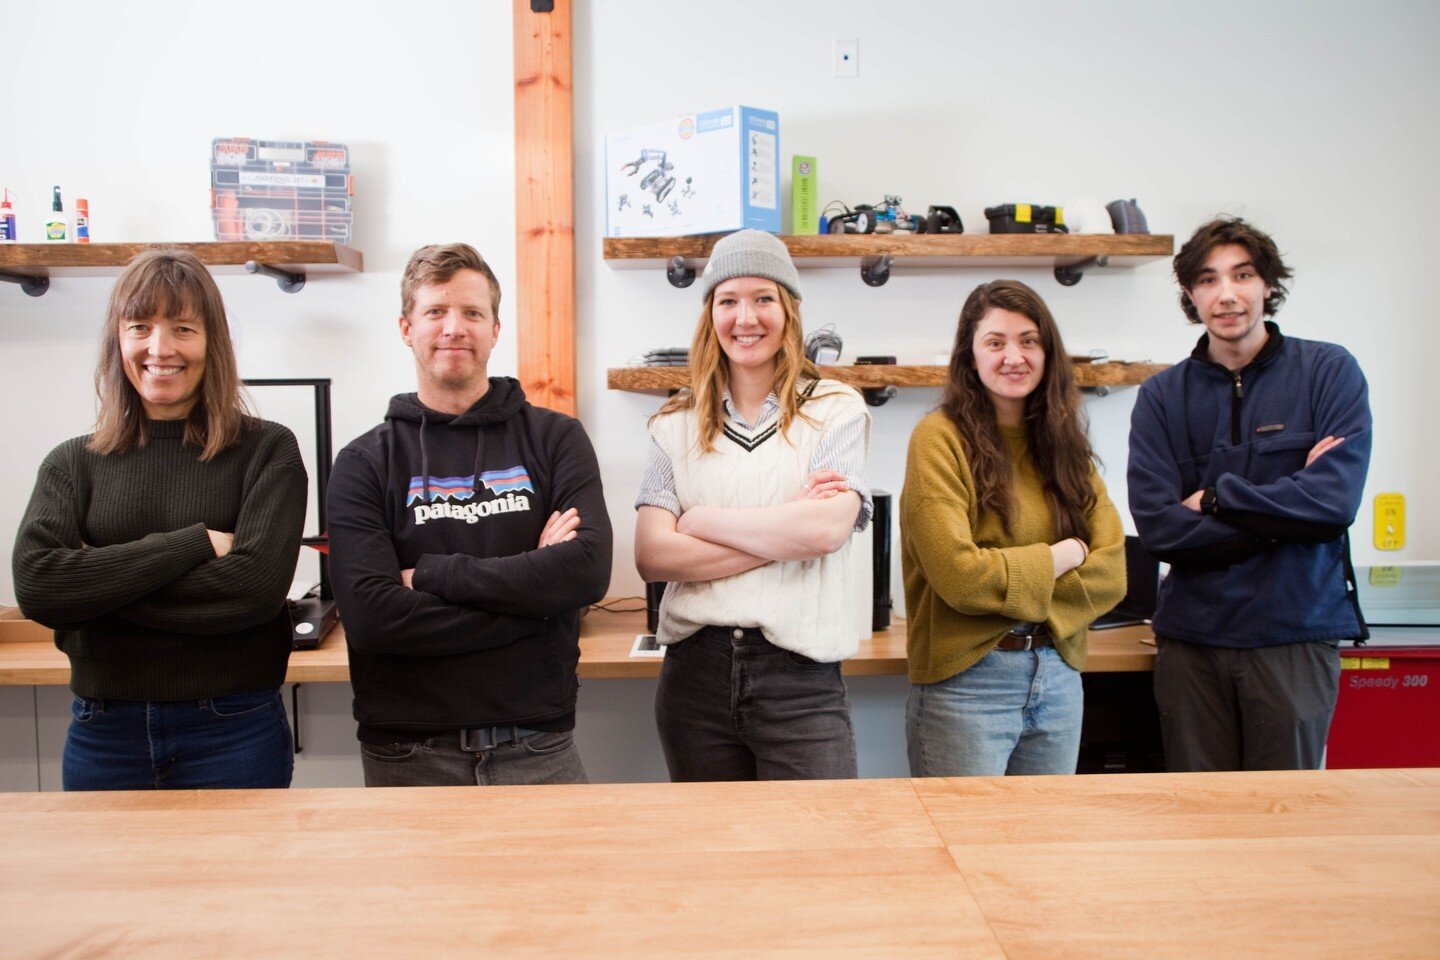 Join the crew! 

We're currently accepting applications for Factory Assistant. 
👉🏻 https://www.revelstokeideafactory.ca/jobopportunities

Photo credit: Peter Moynes @koreoutdoors

@woodandskiing @kootenaymountainculture @vhempsall

#thankyouKORE #w